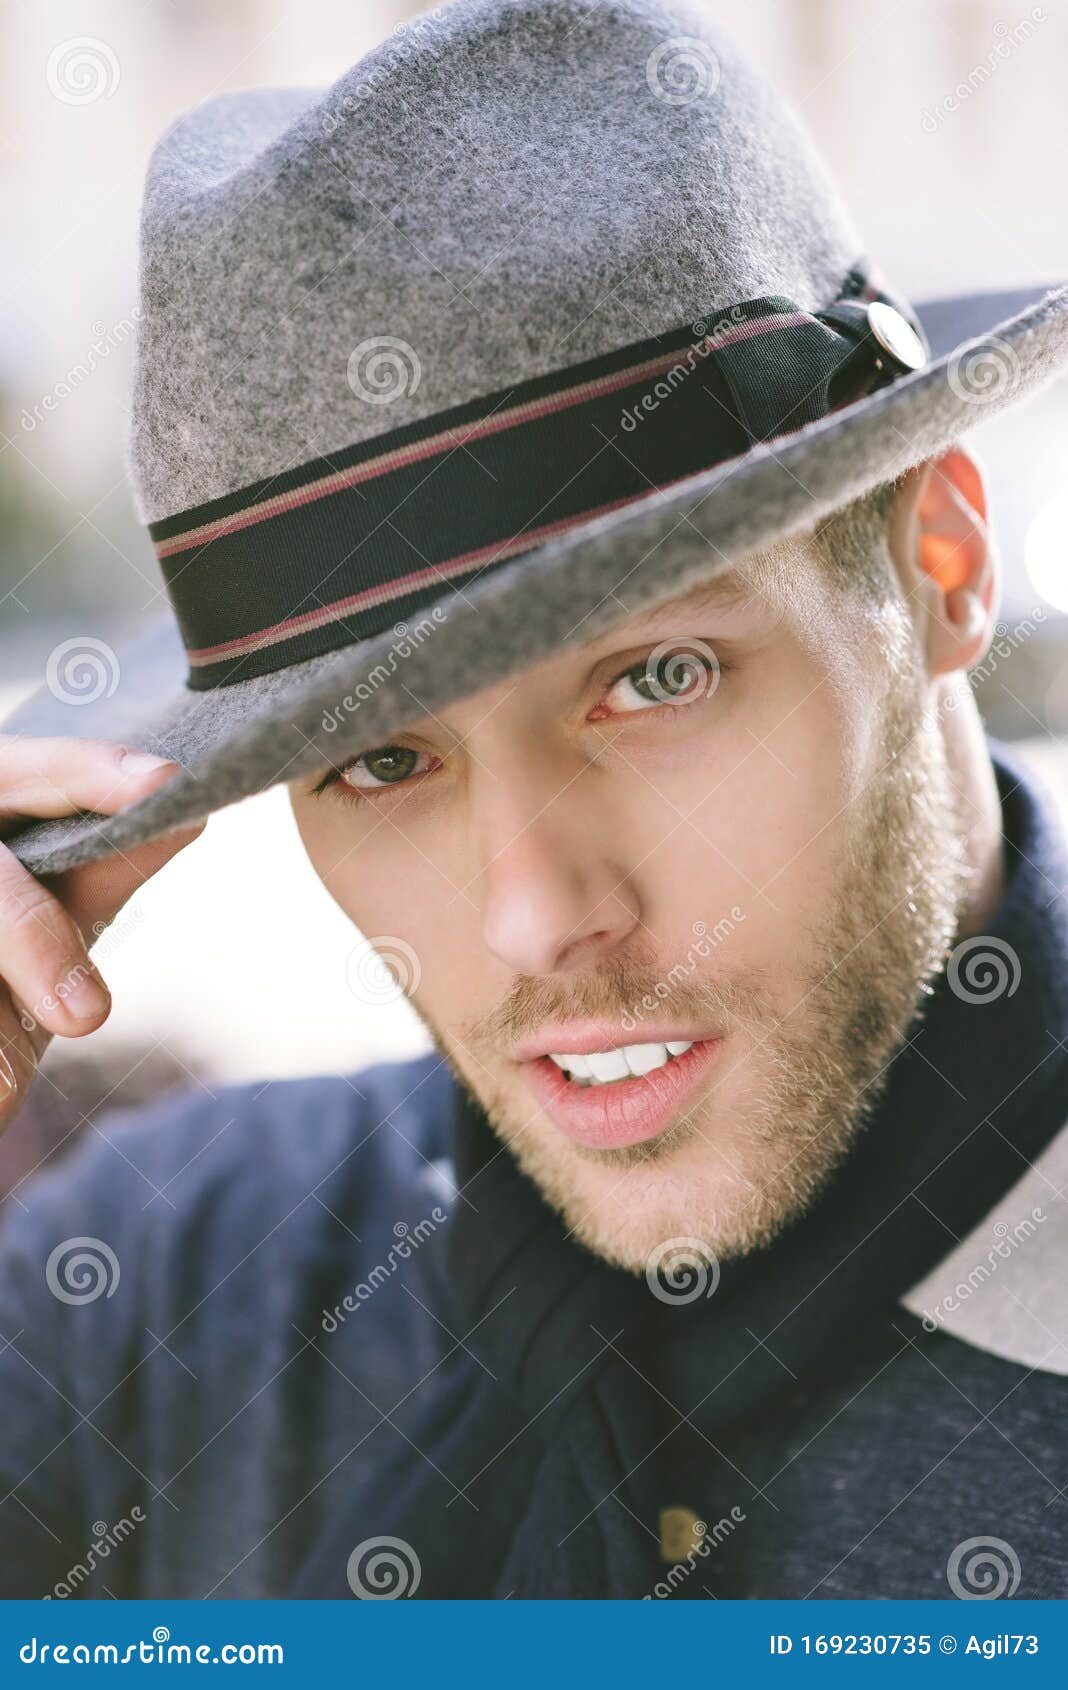 young-caucasian-man-tips-his-fedora-looking-camera-daytime-fashion-millennial-male-looks-placing-hand-hat-white-169230735.jpg